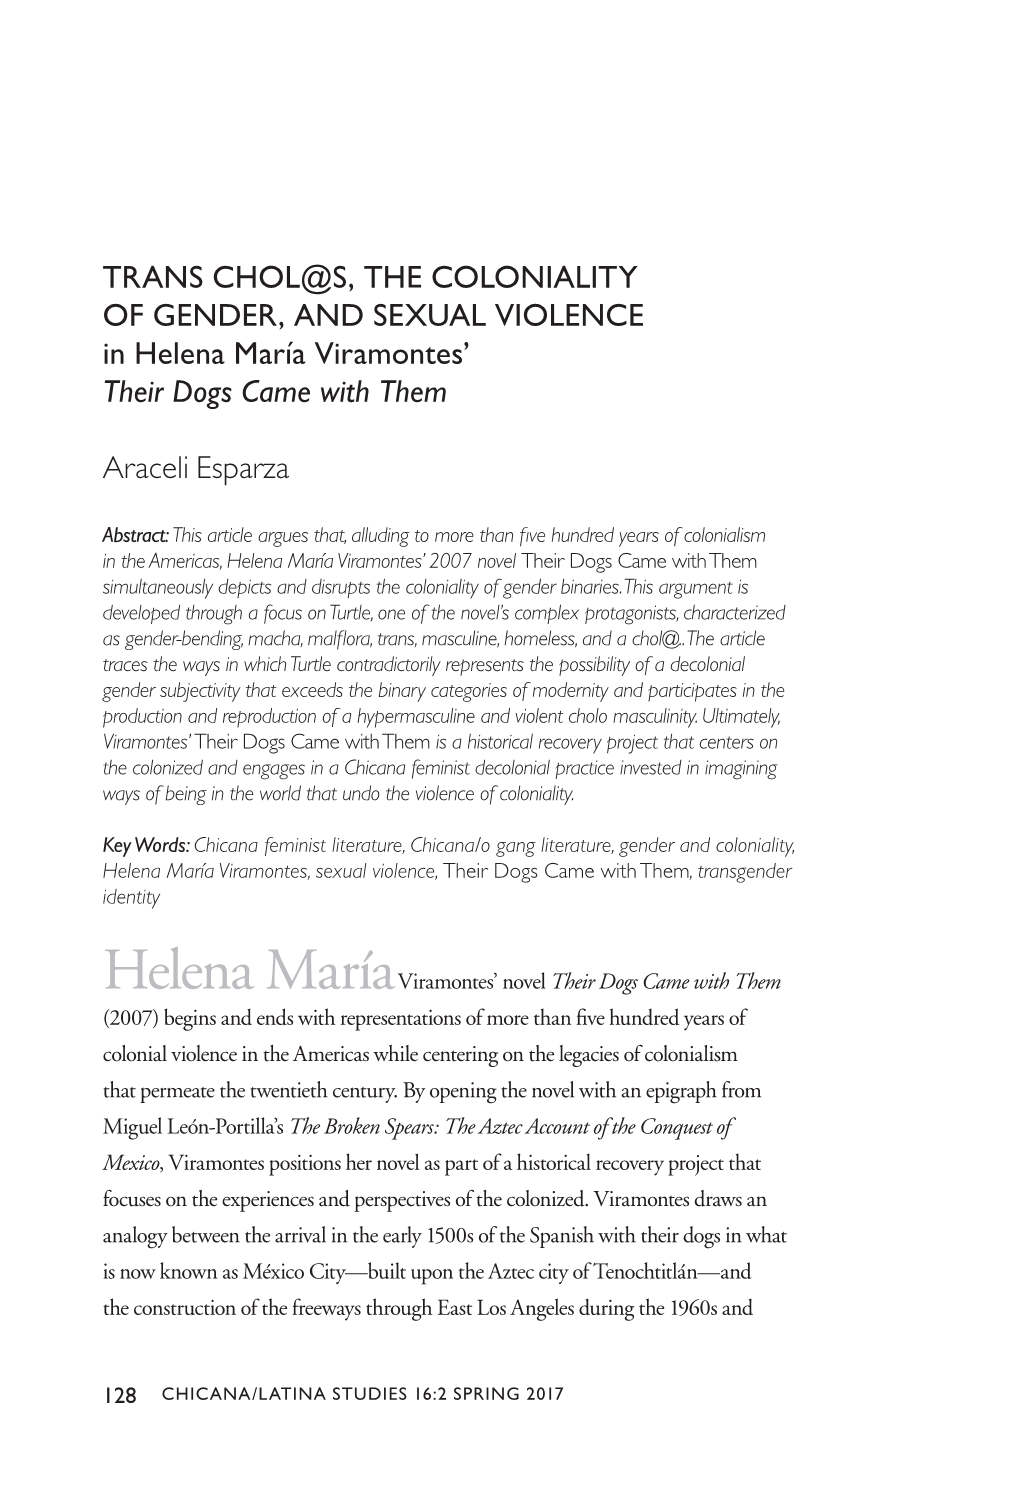 TRANS CHOL@S, the COLONIALITY of GENDER, and SEXUAL VIOLENCE in Helena María Viramontes’ Their Dogs Came with Them